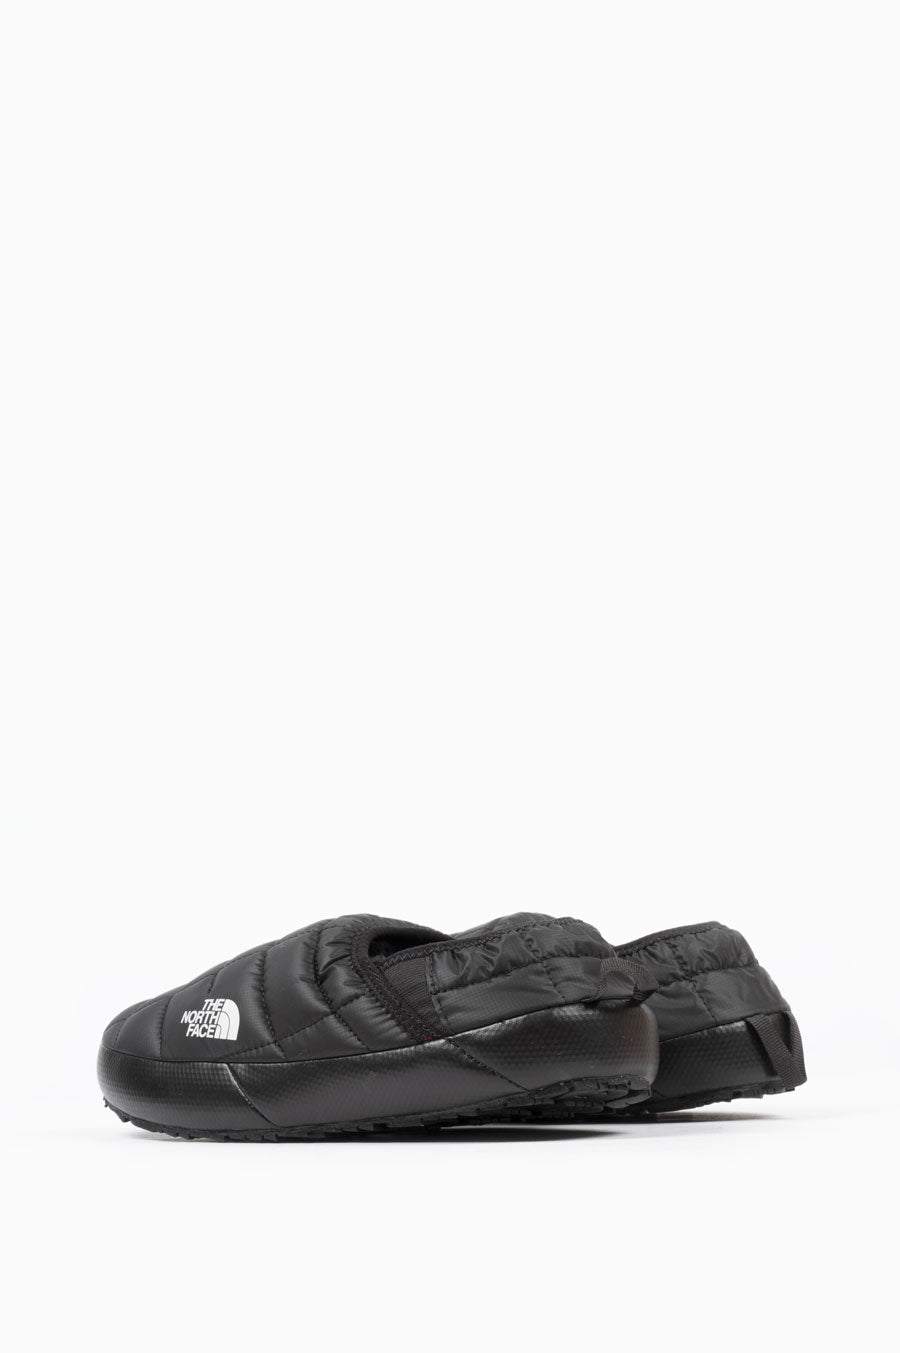 THE NORTH FACE WOMENS THERMOBALL TRACTION MULE BLACK